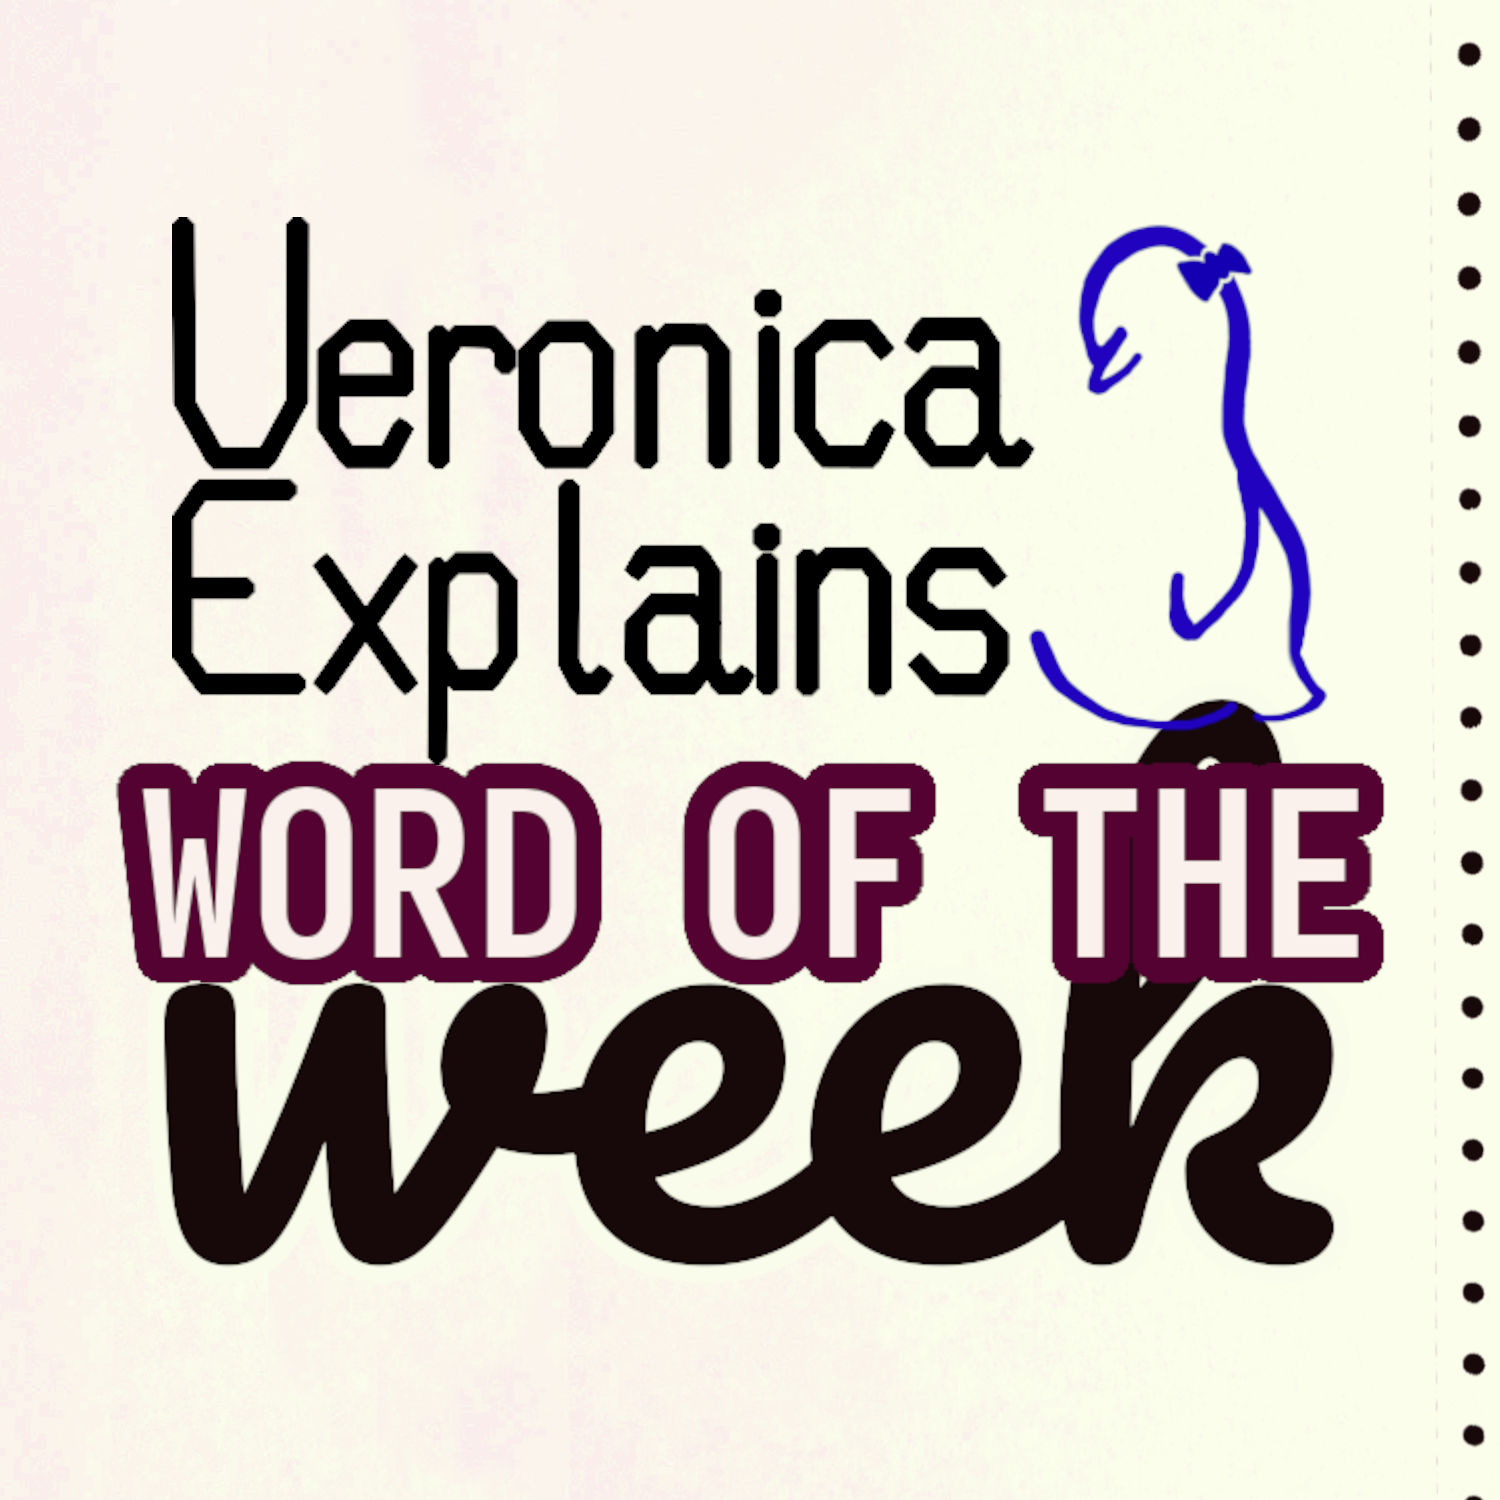 The logo for the Word of the Week podcast. It's the Veronica Explains logo with "WORD OF THE" and "week" added underneath it. The logo says "Veronica Explains" and has a stylized penguin with a bow on its head.